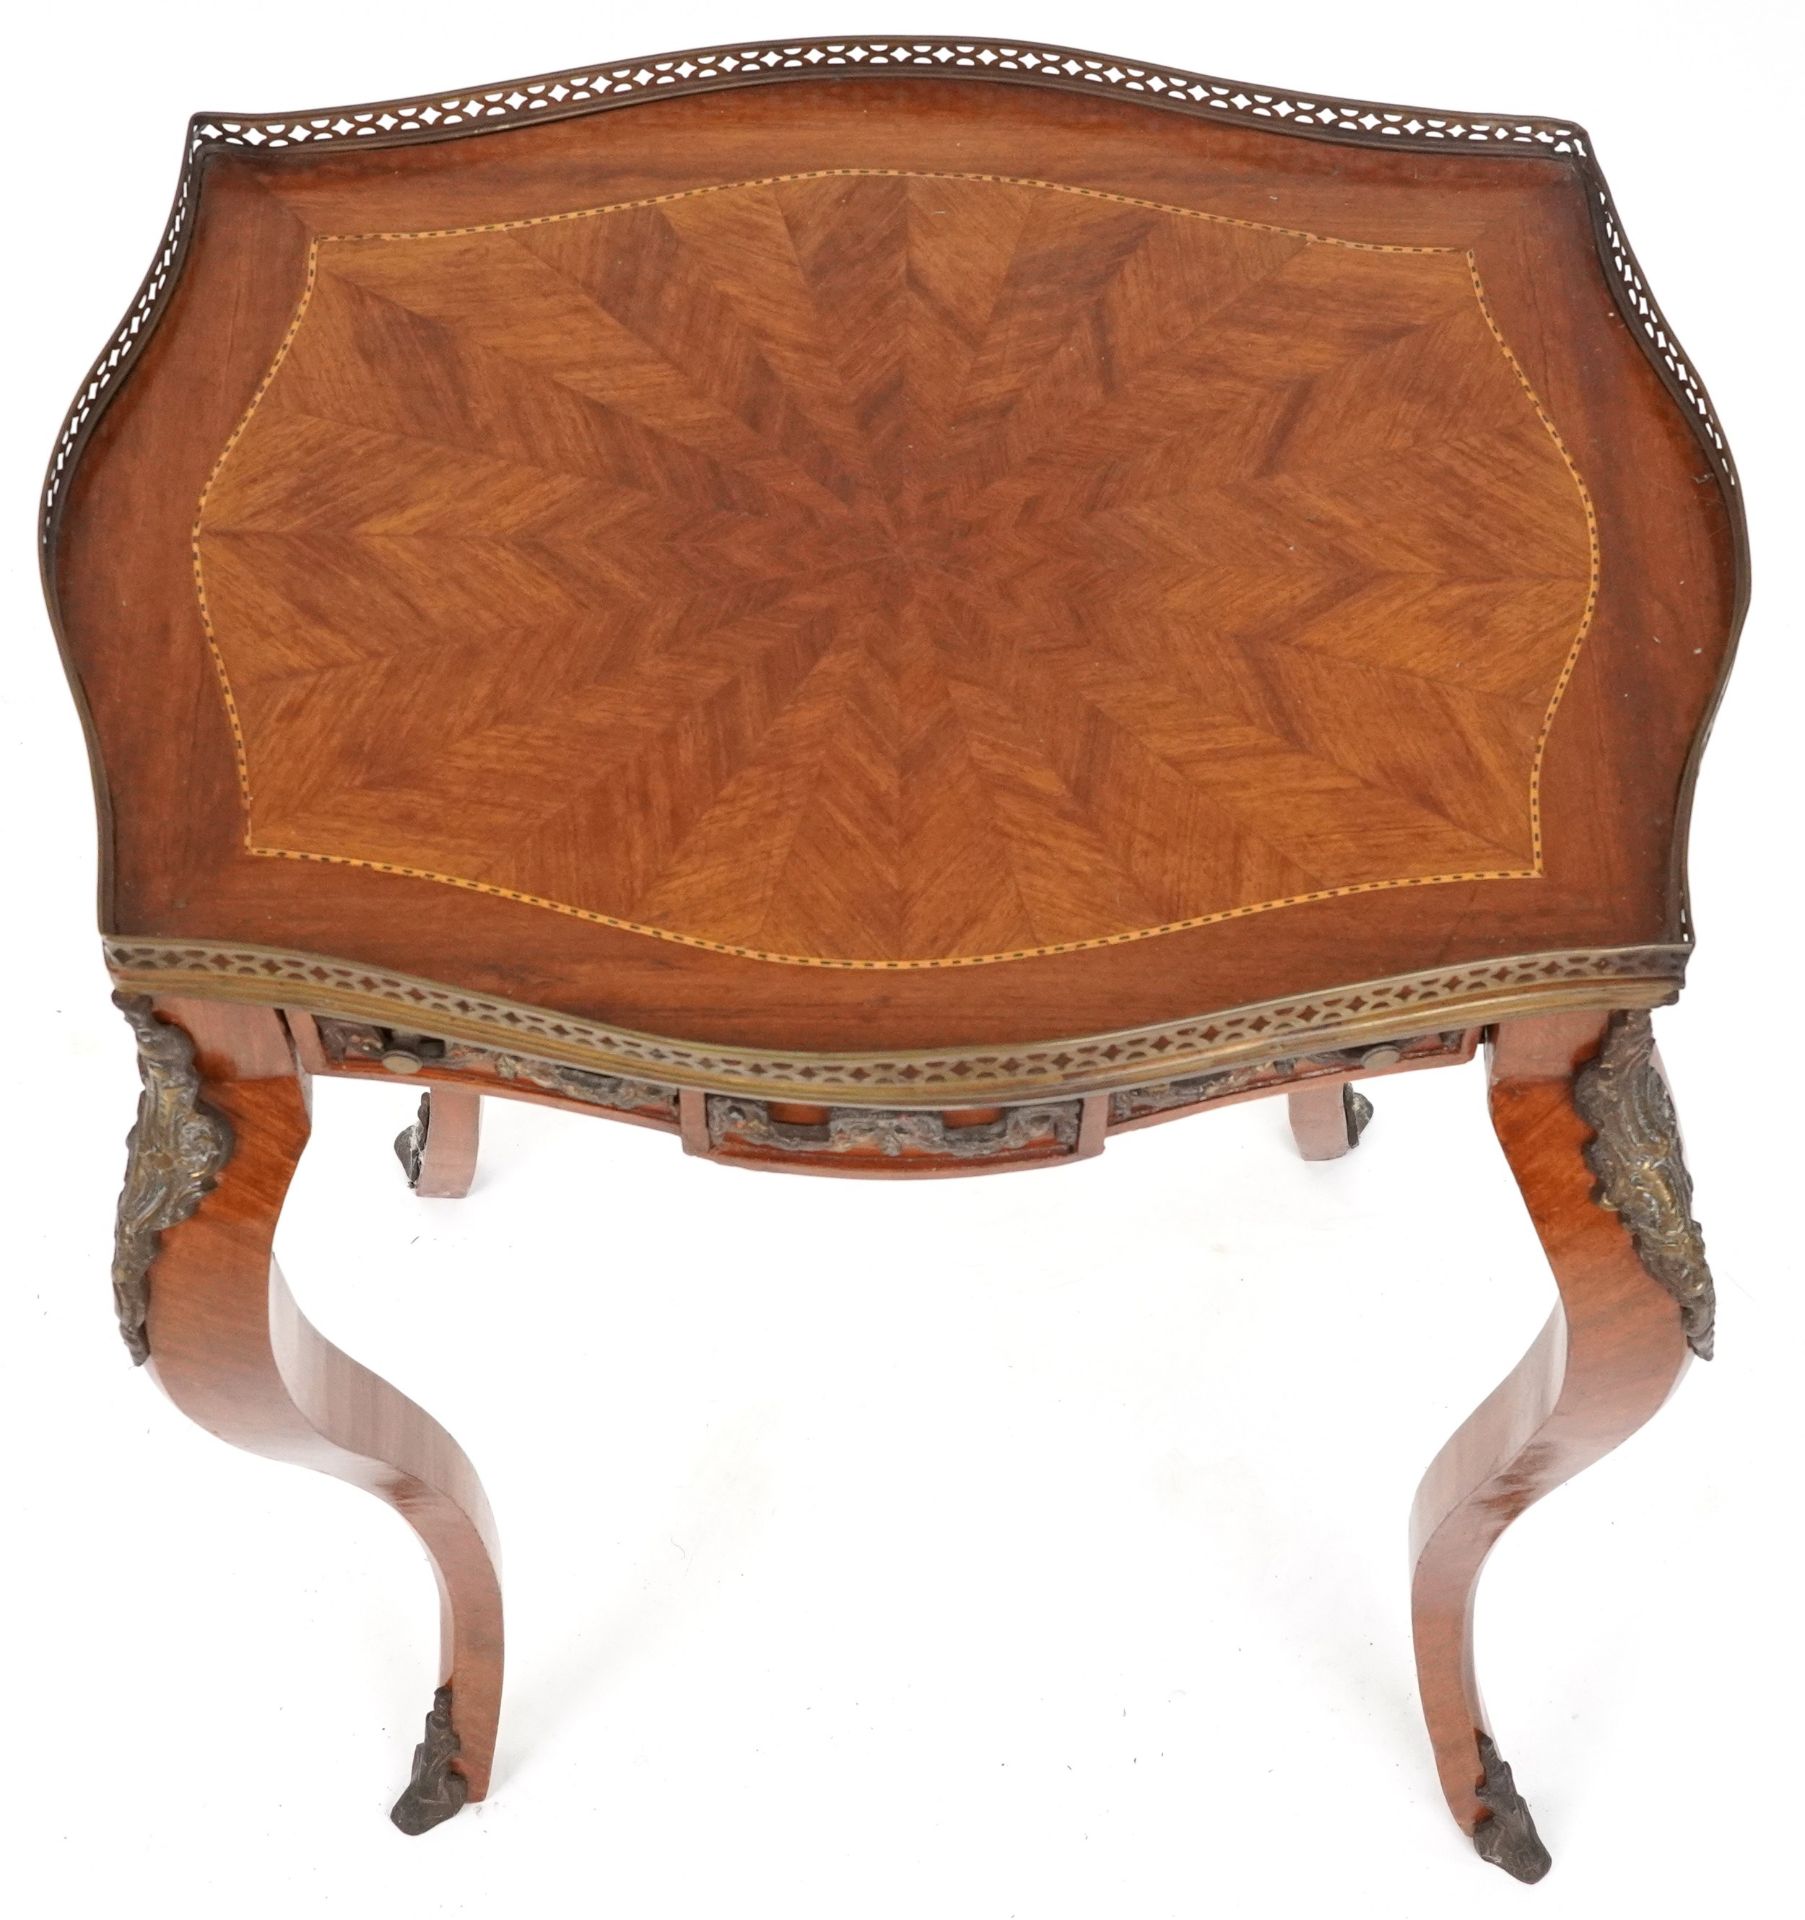 French Louis XV style inlaid kingwood side table with frieze drawer and brass mounts on cabriole - Image 3 of 4